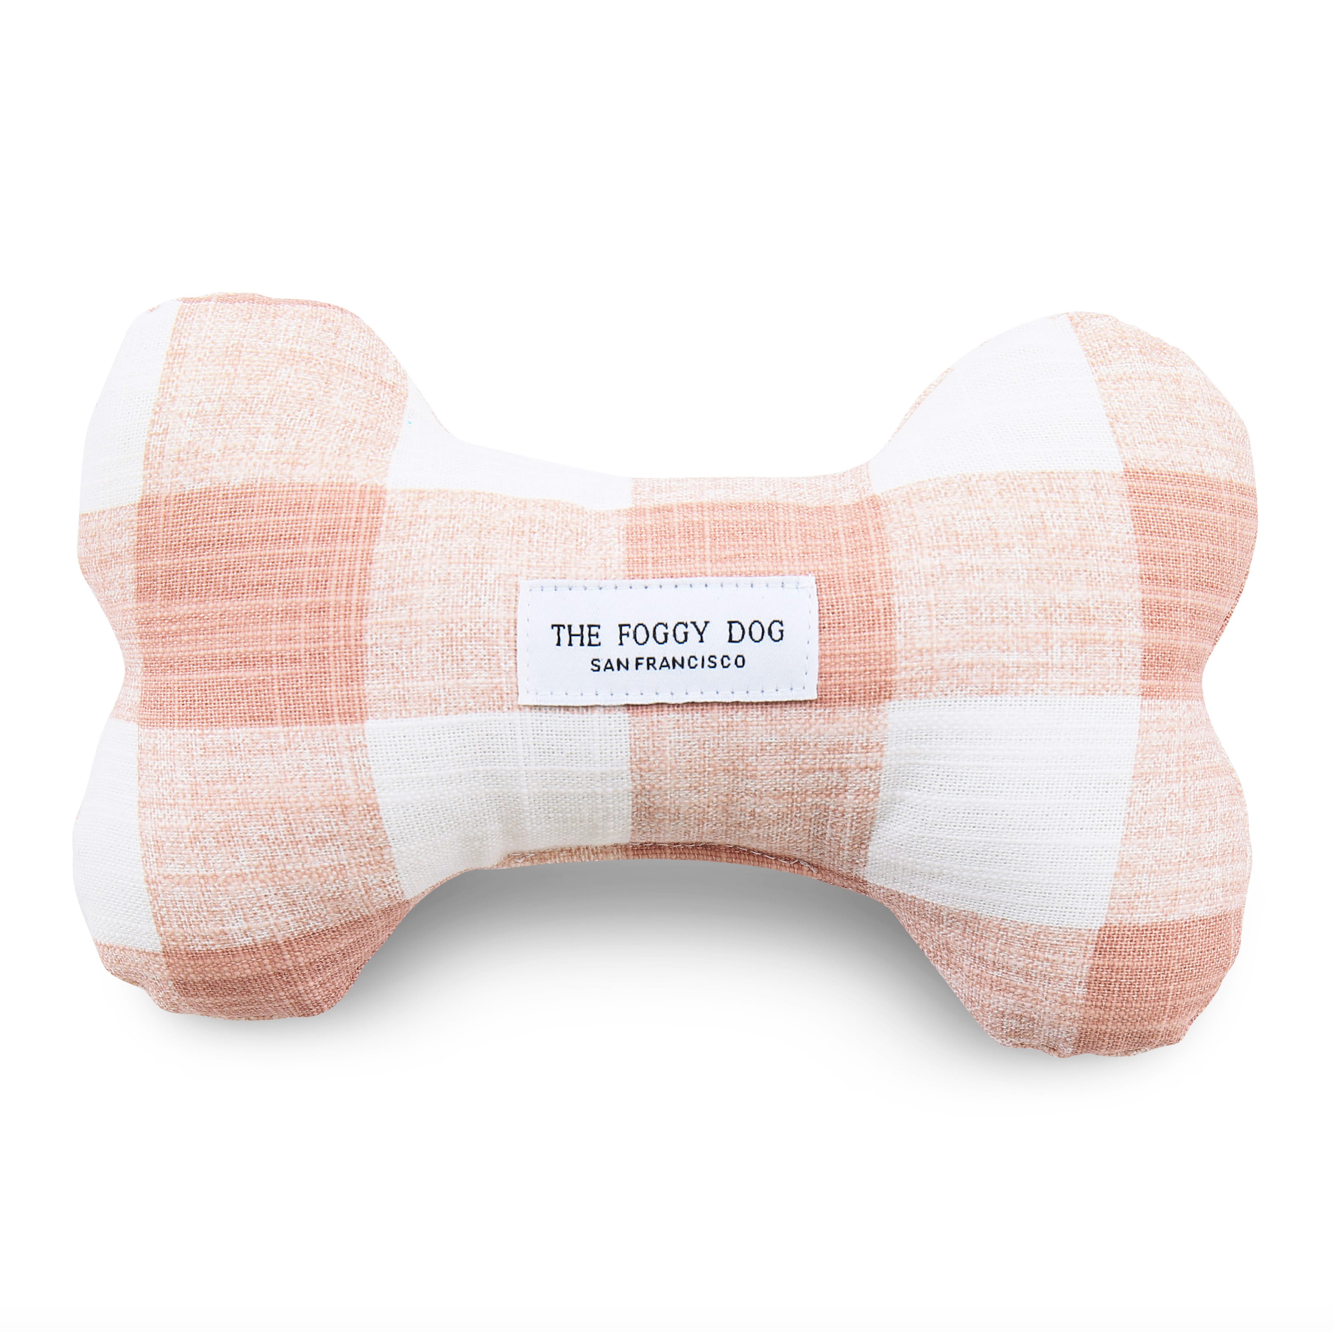 Blush Pink Gingham Dog Bone Squeaky Toy By The Foggy Dog 